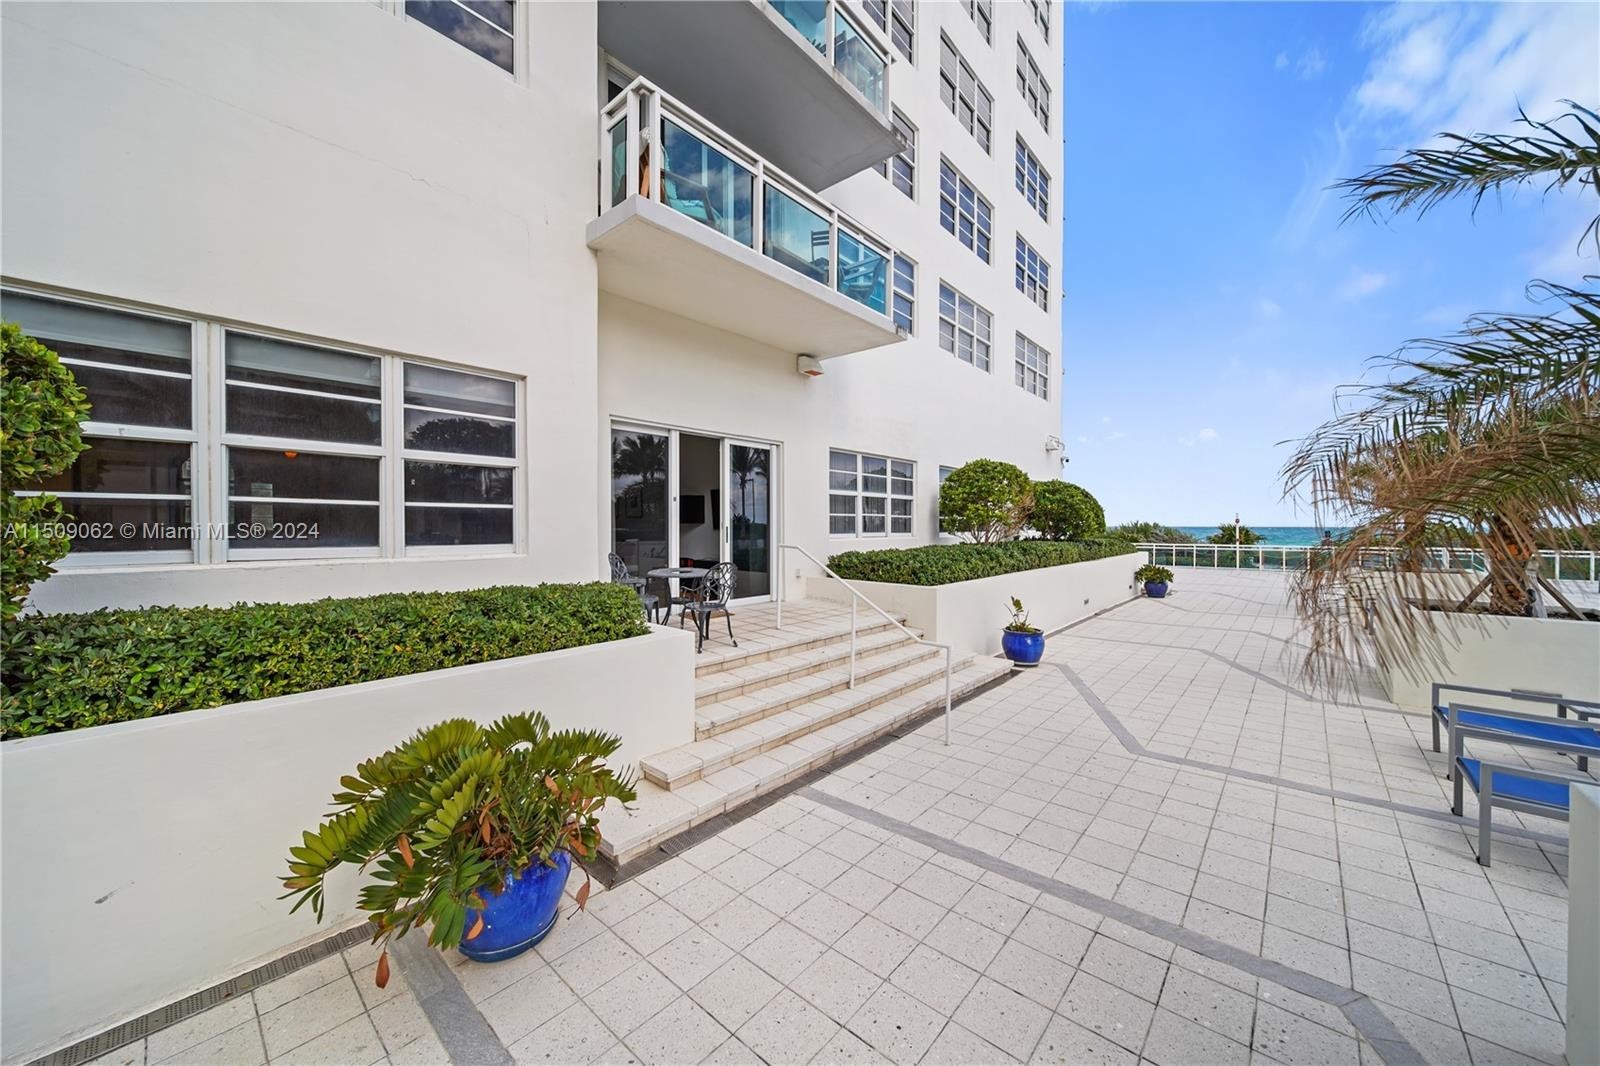 30. 6917 Collins Ave